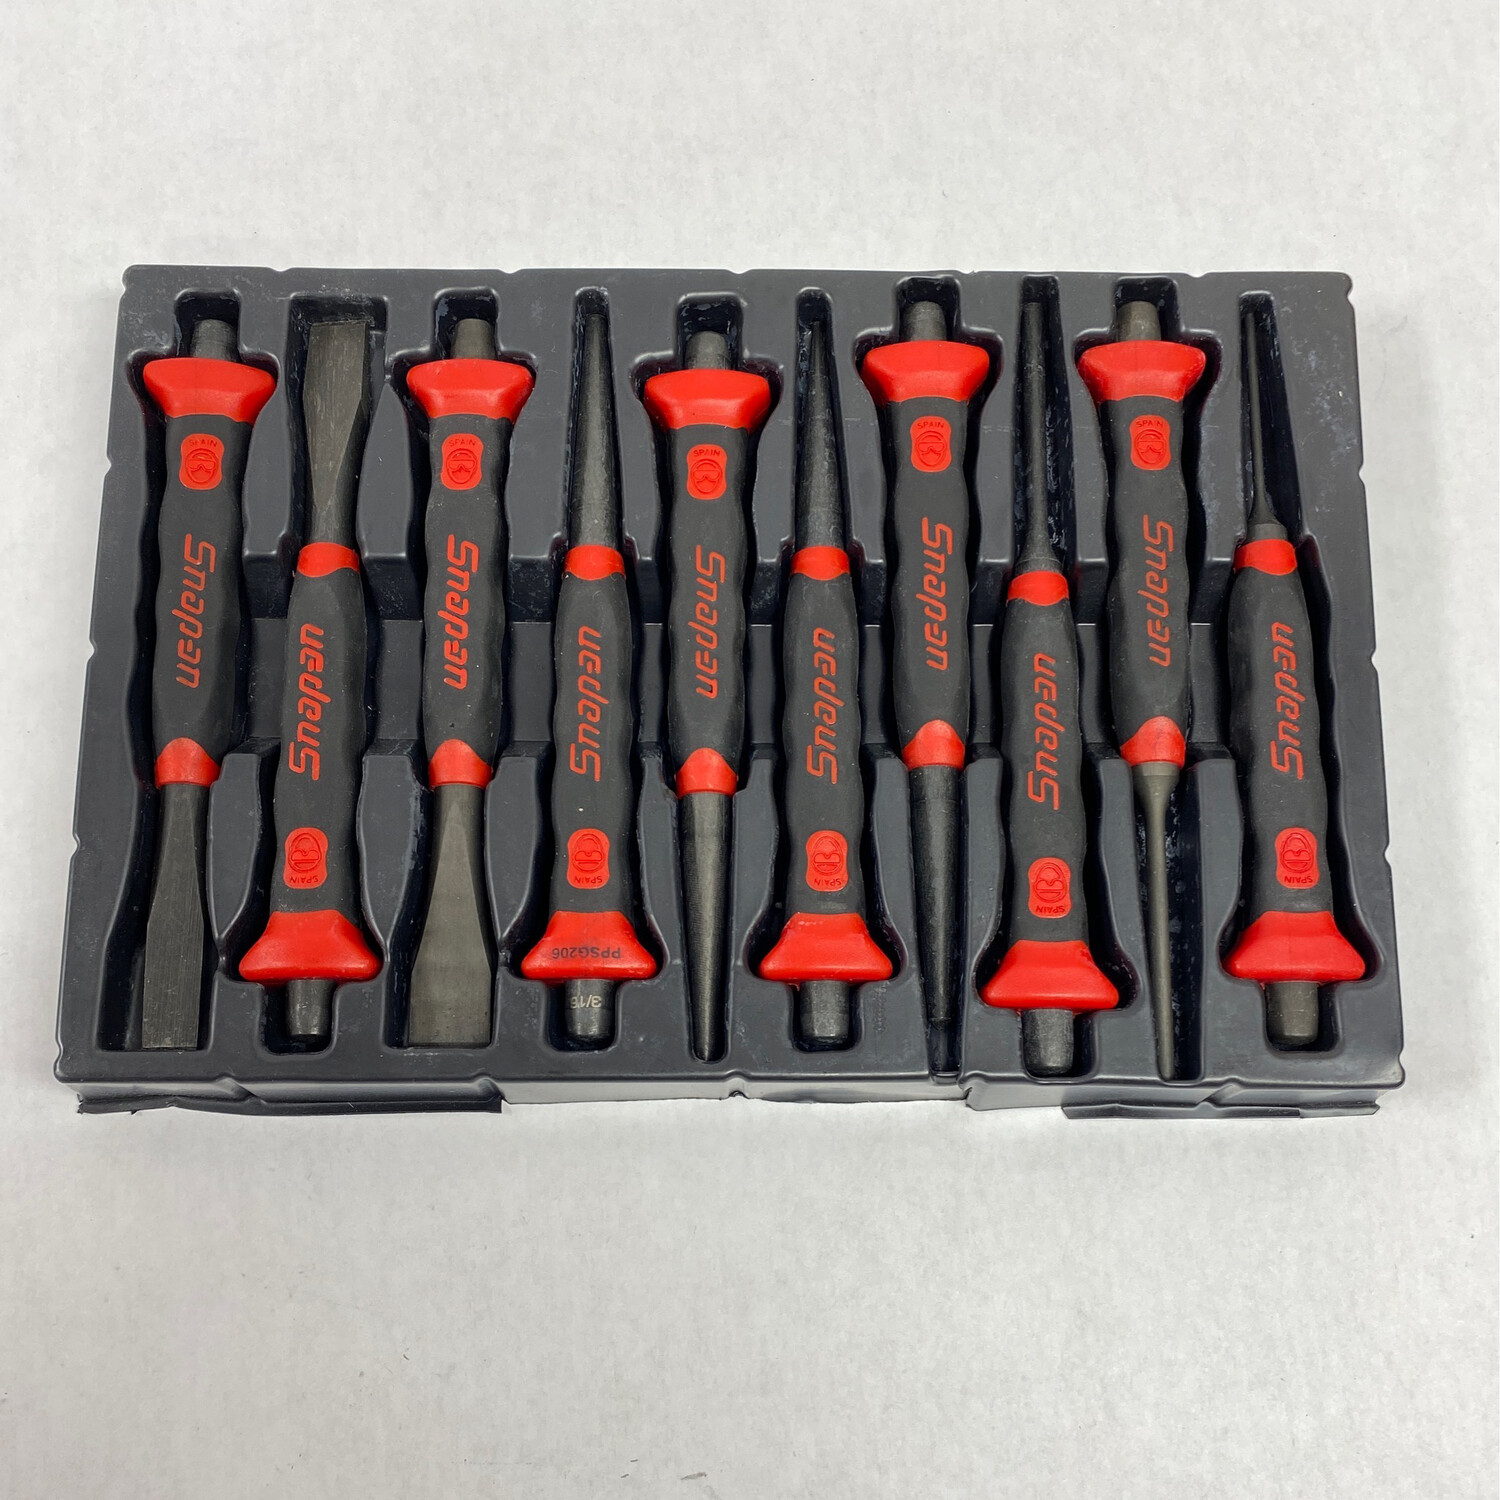 New Snap On 10 pc Soft Grip Punch and Chisel Set, PPCSG710